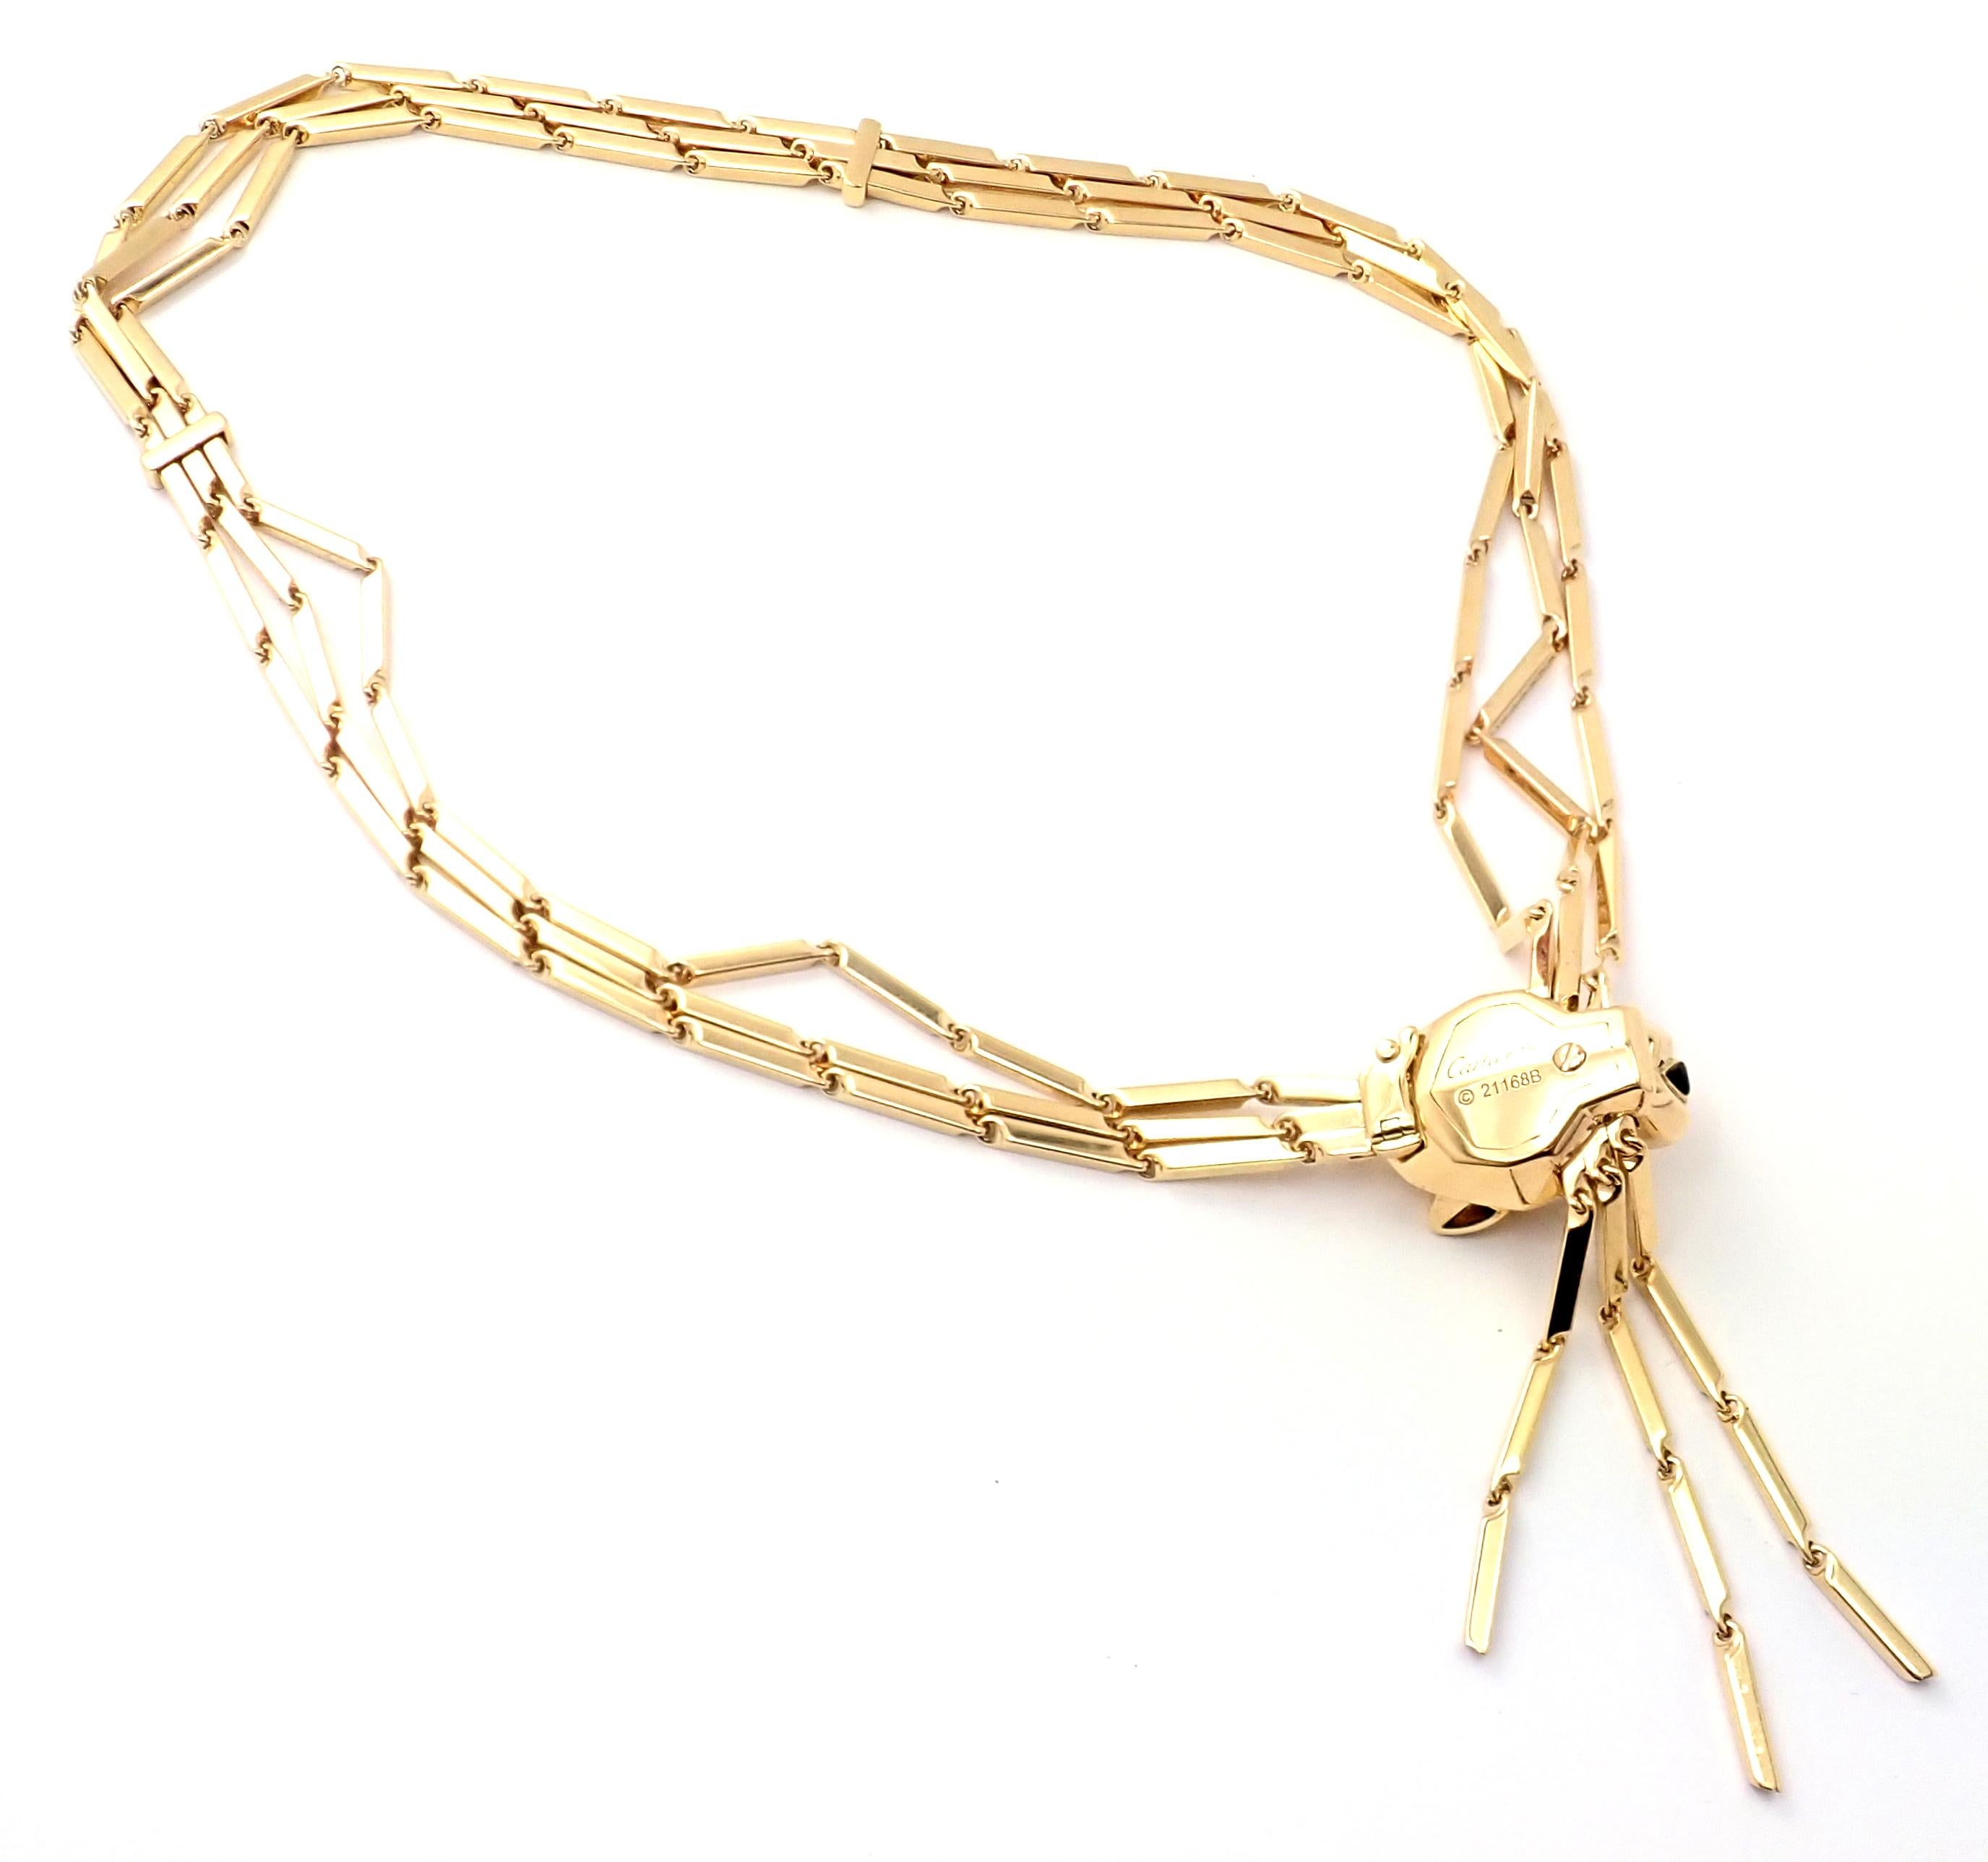 Brilliant Cut Cartier Panther Diamond Peridot Onyx Lacquer Tassel Yellow Gold Necklace For Sale